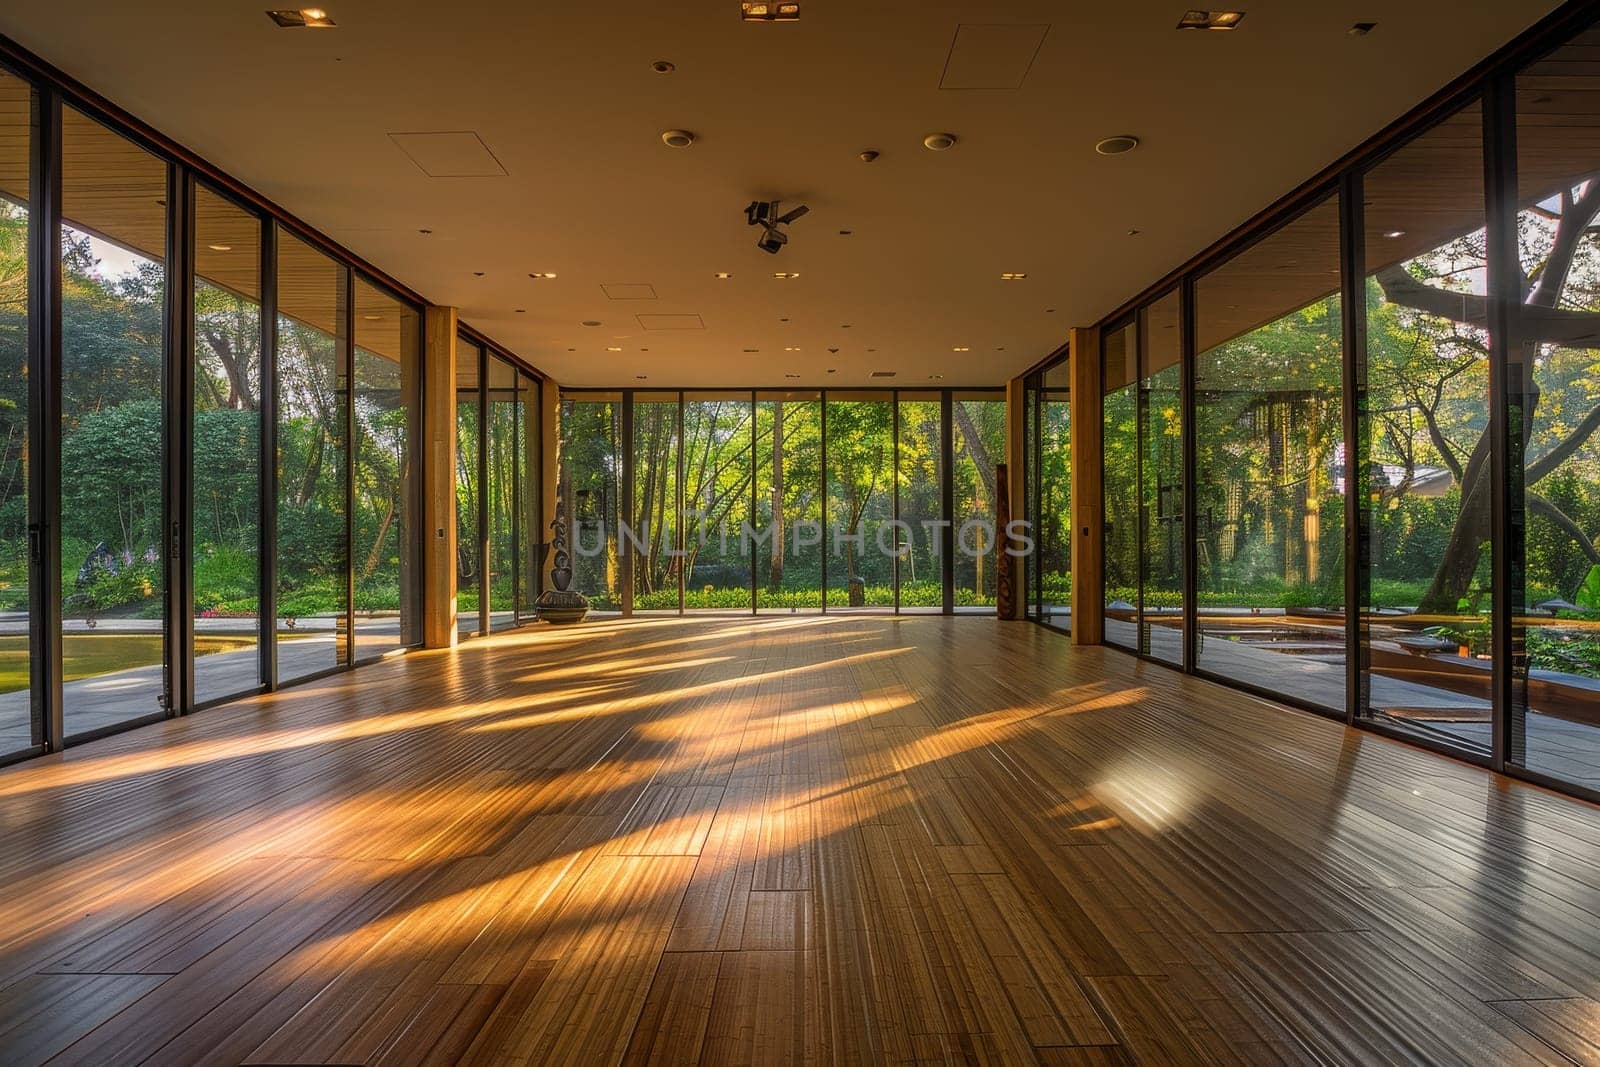 A large room with wooden floors and lots of windows. The room is empty and the sunlight is shining through the windows